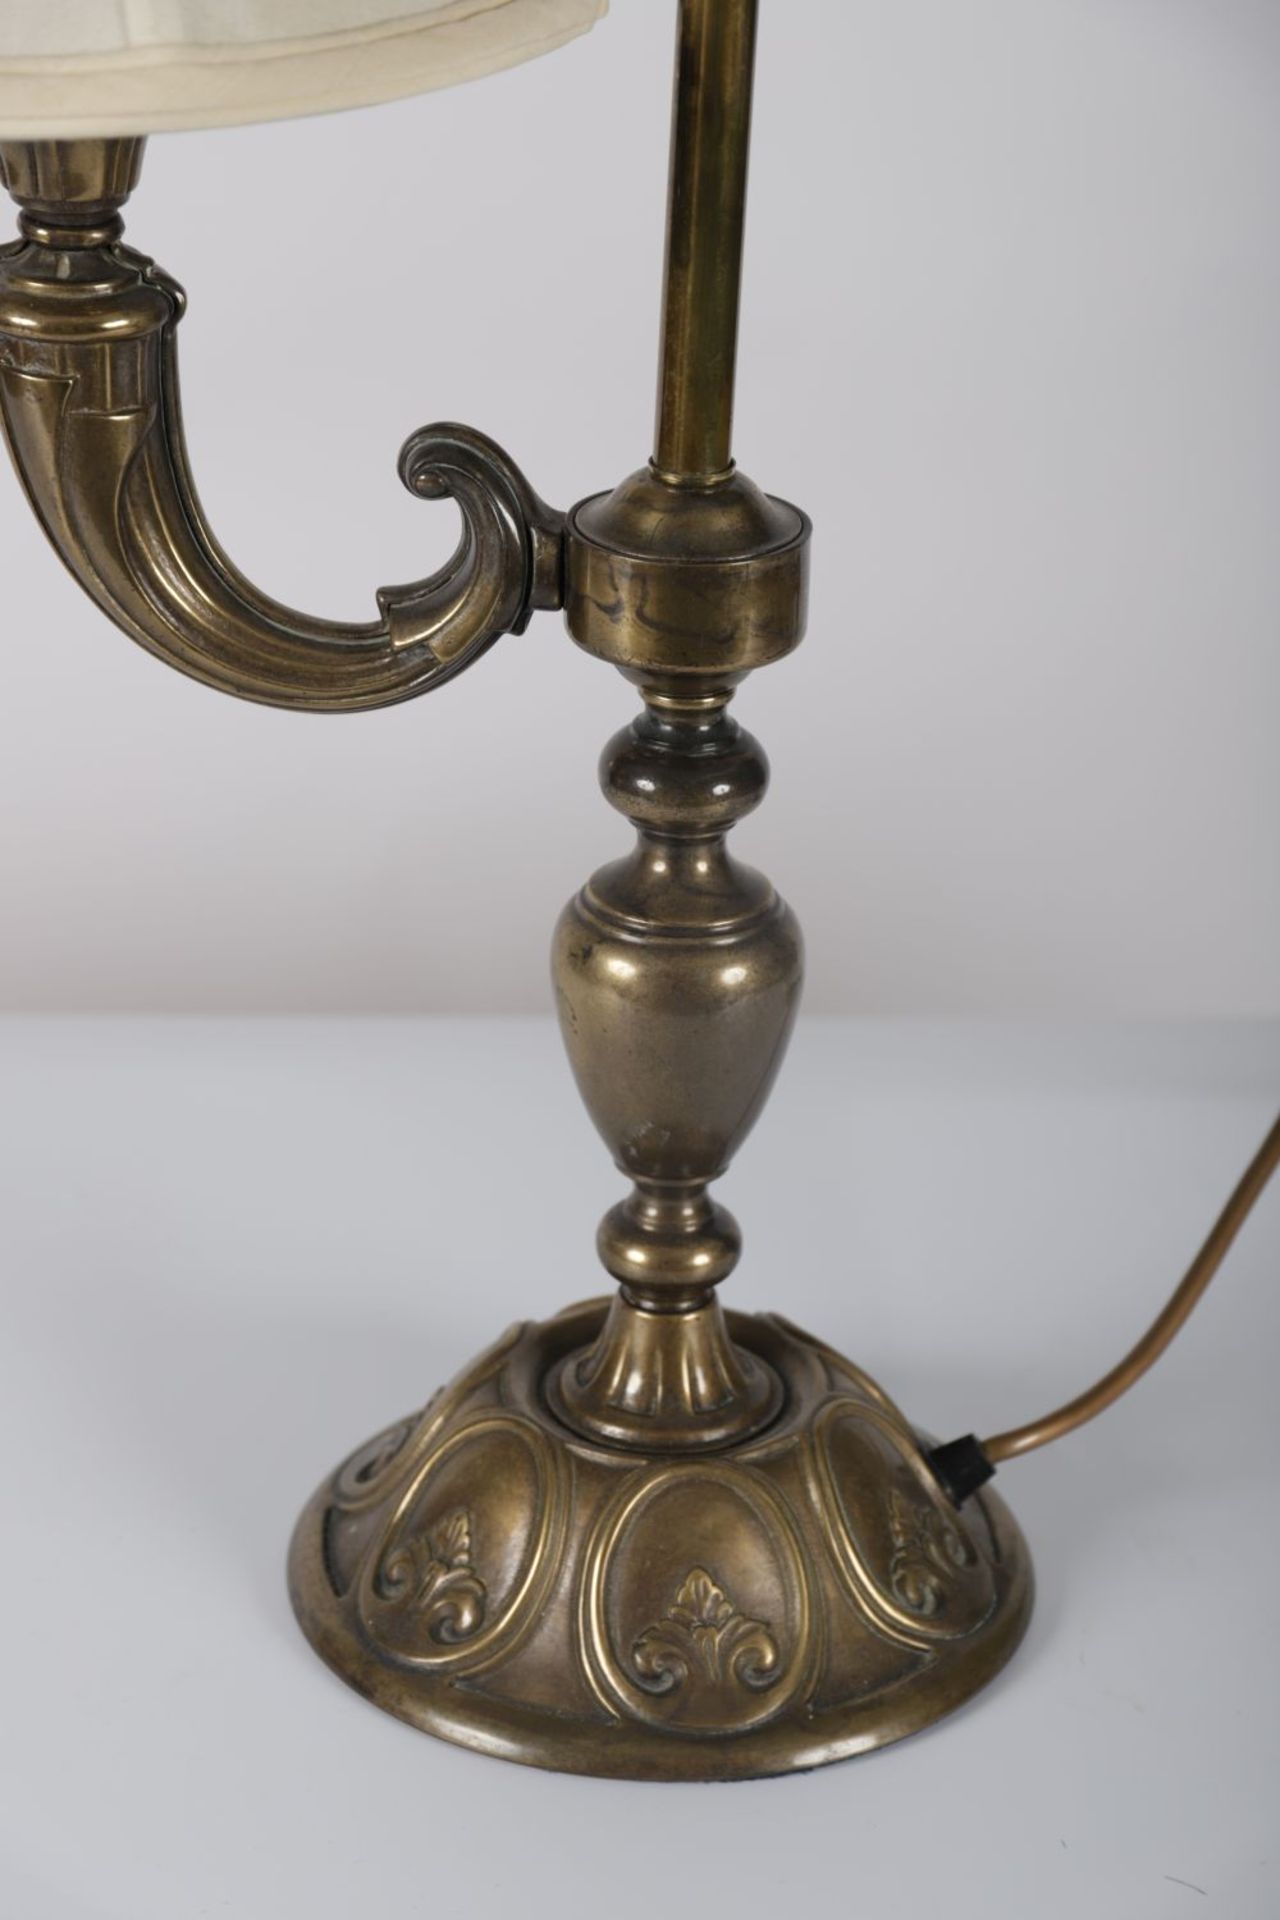 EDWARDIAN BRASS TABLE LAMP - Image 2 of 3